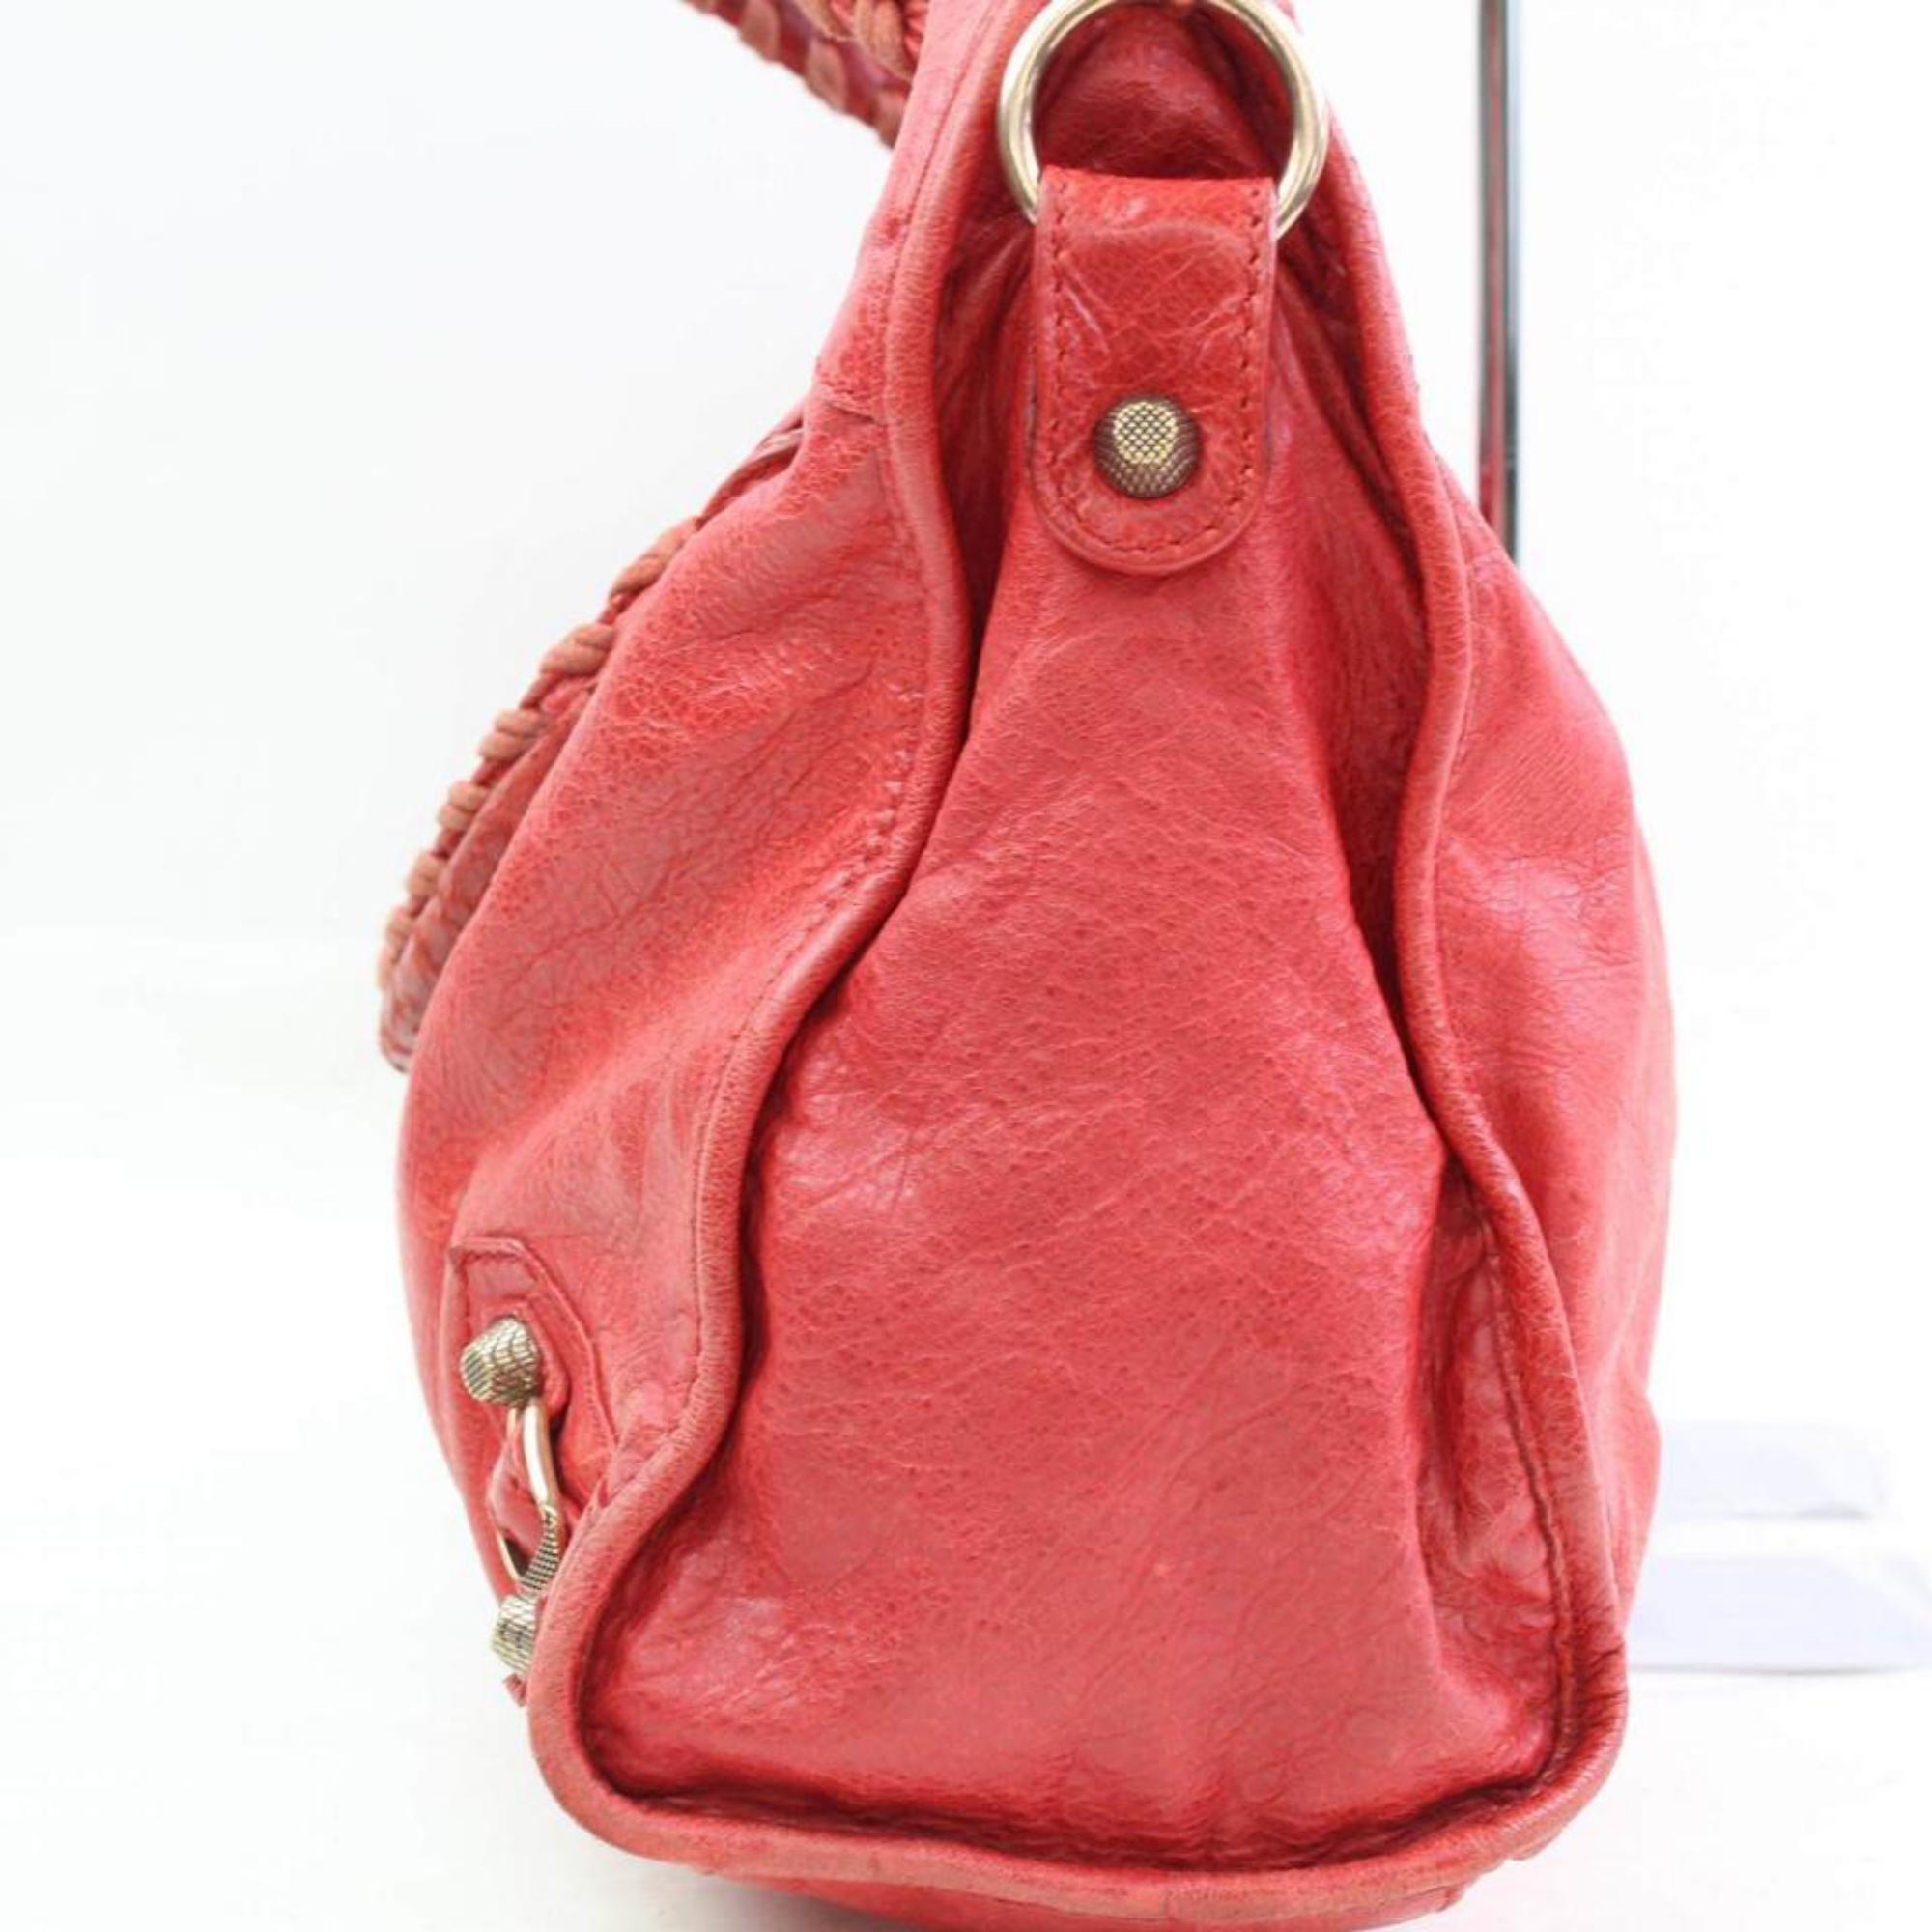 Balenciaga The City 2way 866491 Red Leather Shoulder Bag For Sale 4